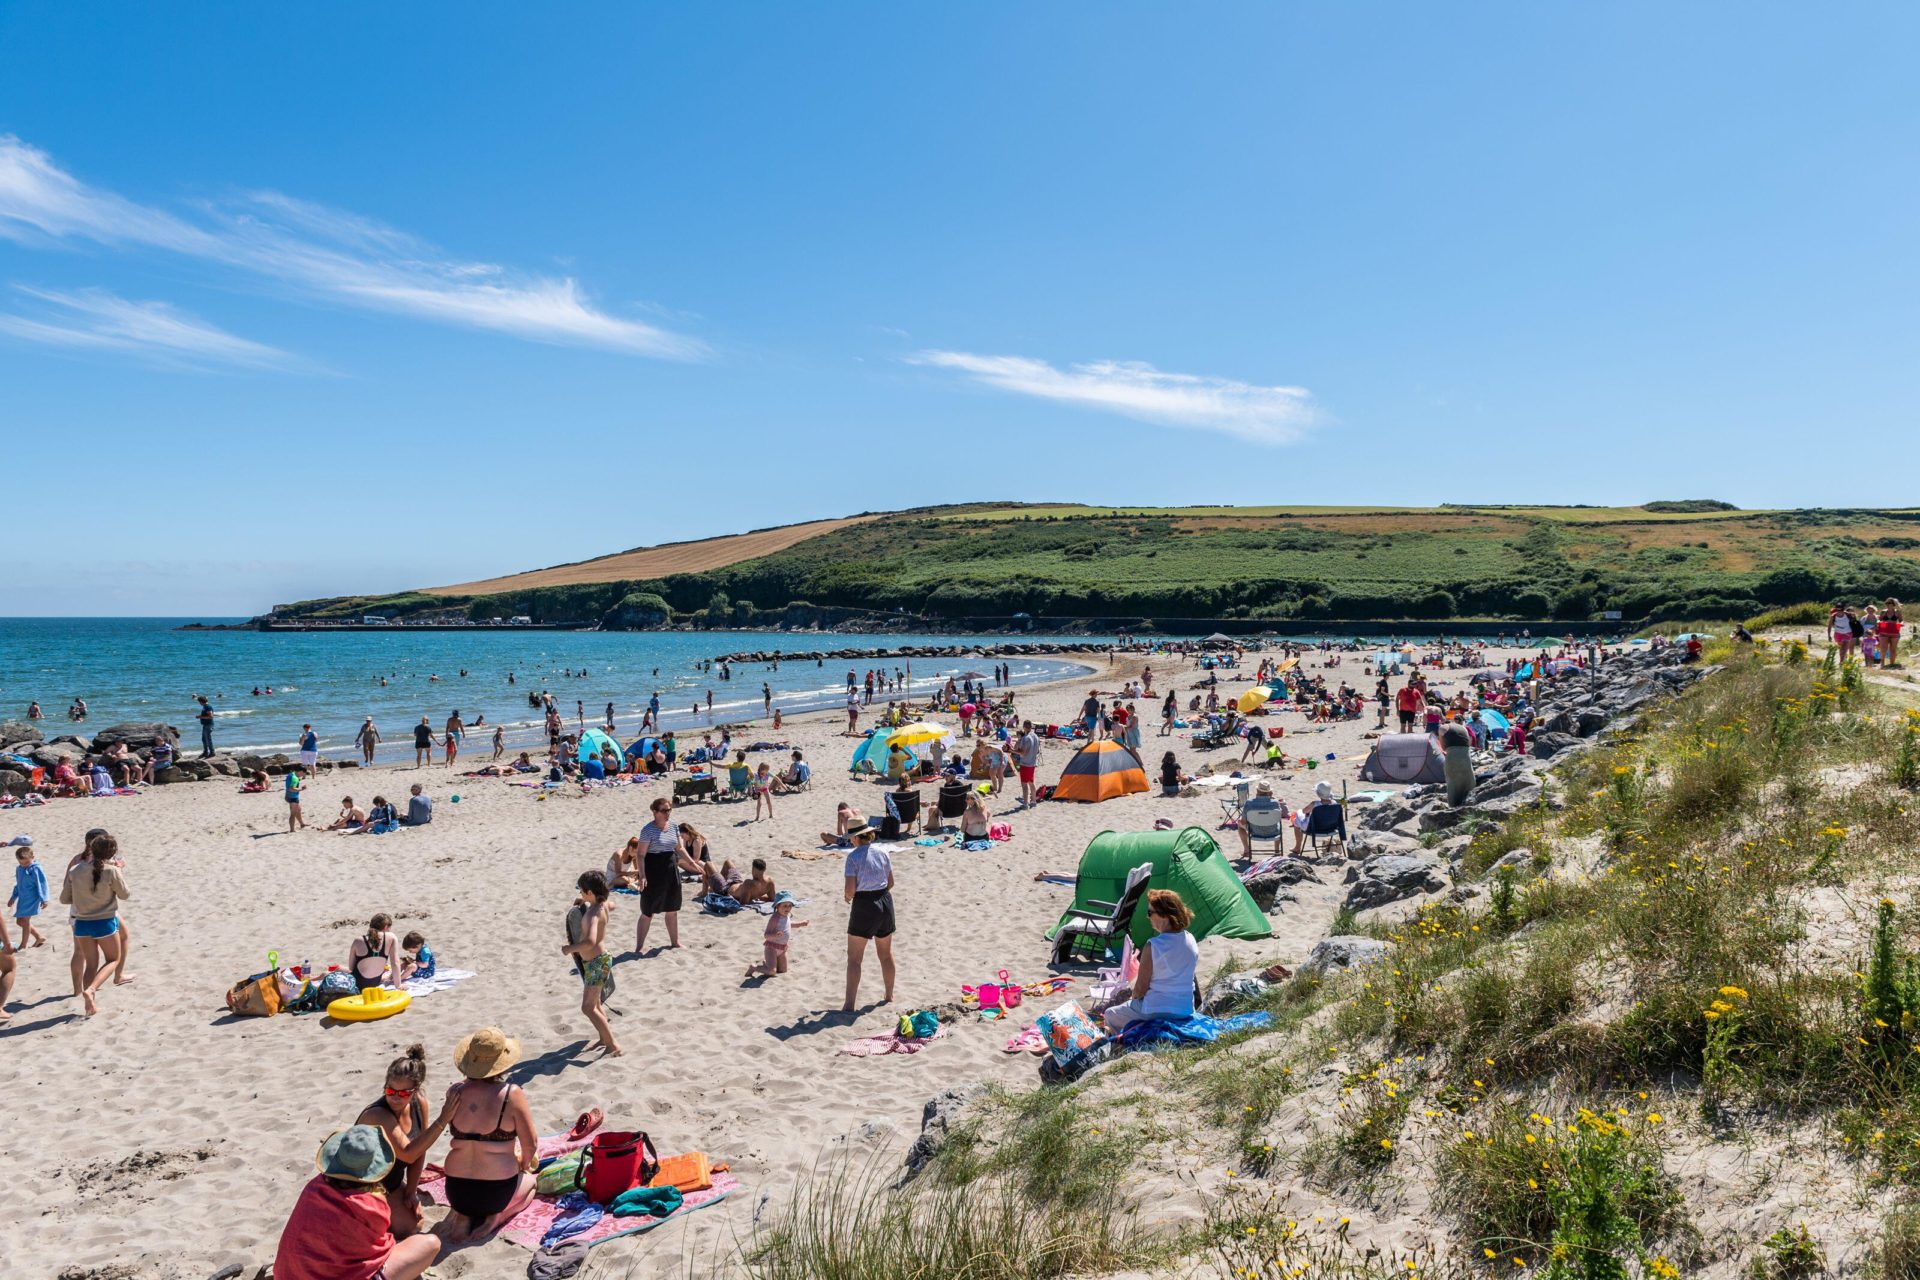 People hit the beach Rosscarbery, West Cork to make the most of the hot weather, 10-07-2022. Image: AG News/Alamy Live News